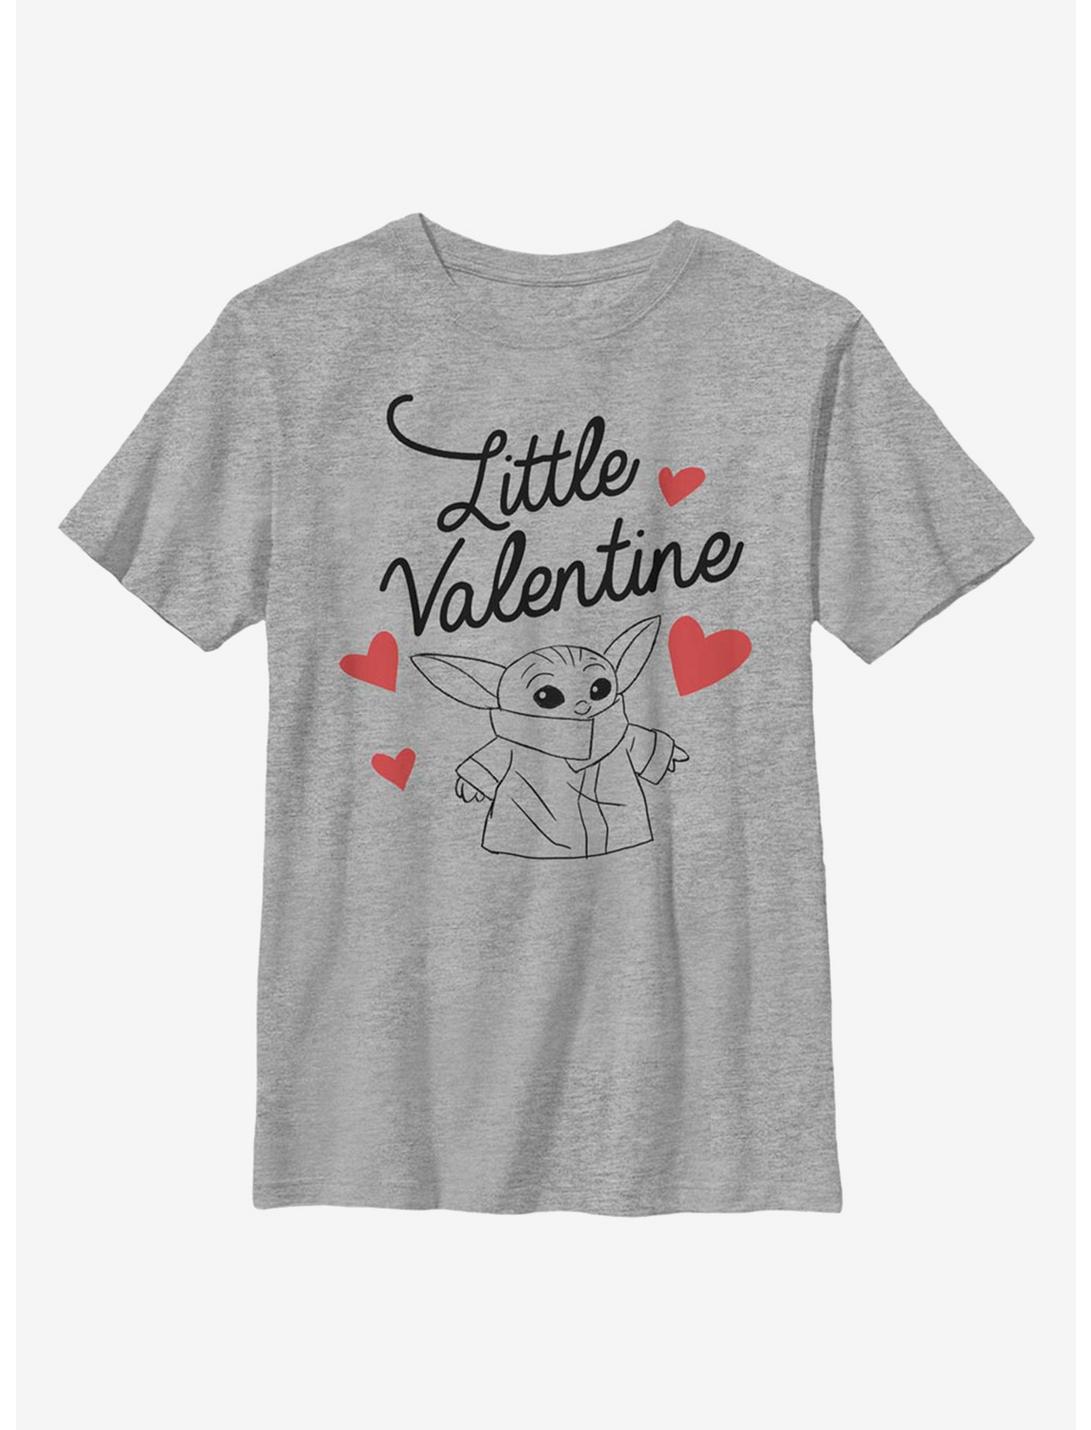 Star Wars The Mandalorian Little Valentine Youth T-Shirt, ATH HTR, hi-res